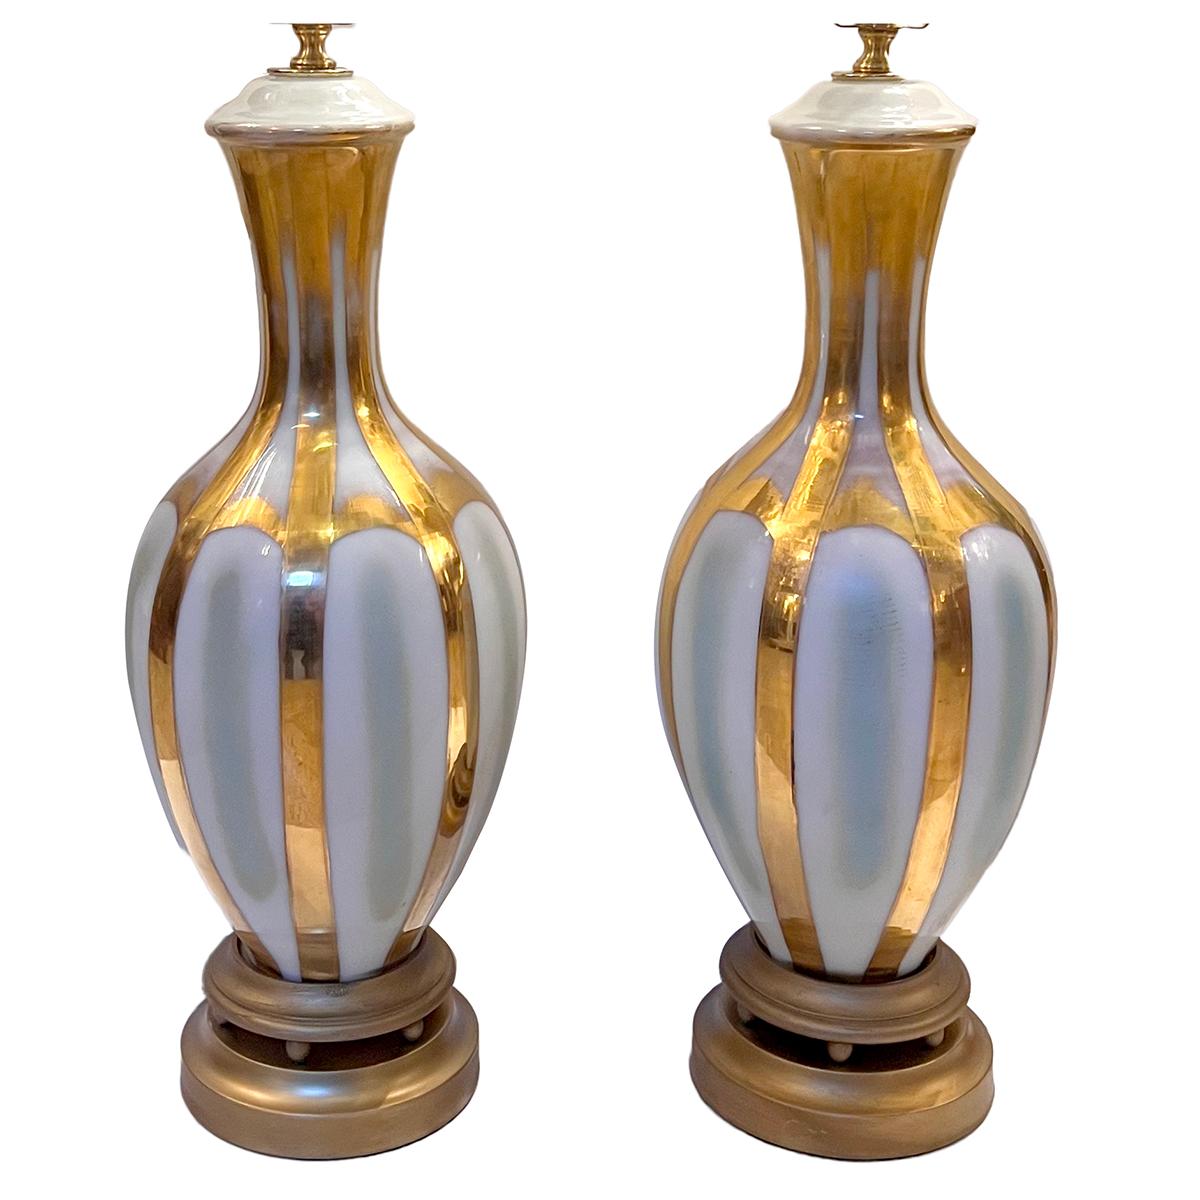 A pair of French circa 1940's gilt and white porcelain table lamps.

Measurements:
Height of body: 21